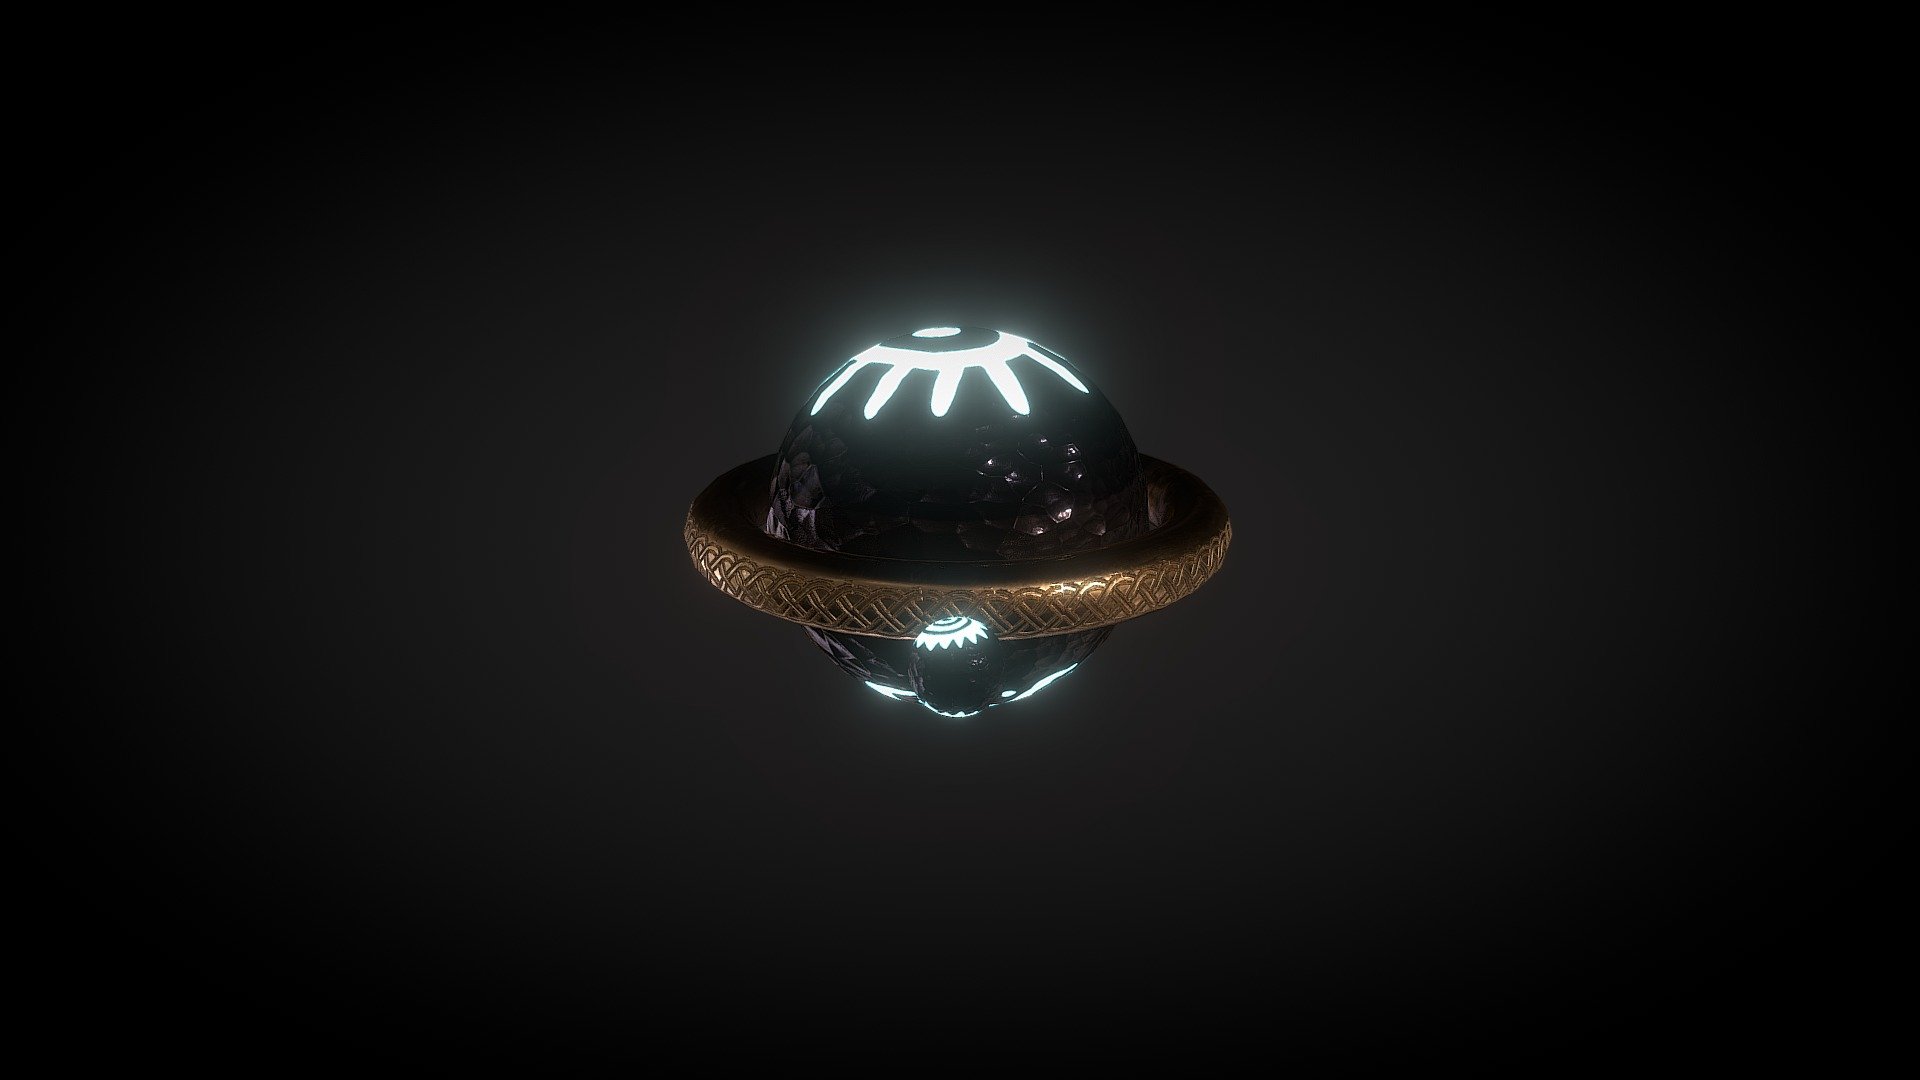 Magic gyroscope with celtic inspiration. Made and animated in 3DsMax with textures made in Substance.
The FBX comes with a seamless loop of the bronze ring and the little obsidian sphere both rotating around the big one which is rotating too. I named this object a magic gyroscope as the overall artefact reminds the design of those objects yet the movements are made to remind those of stars and planets. 
Both spheres are pierced on top and bottom so the model only uses 4 sides polygons.

I think the object would fit nicely into a fantastic story, as lore or decoration. 

Feel free to ask me anything about the model or its design or to ping me for any creation made using it :) - Magic gyroscope - Download Free 3D model by DragonJojo 3d model